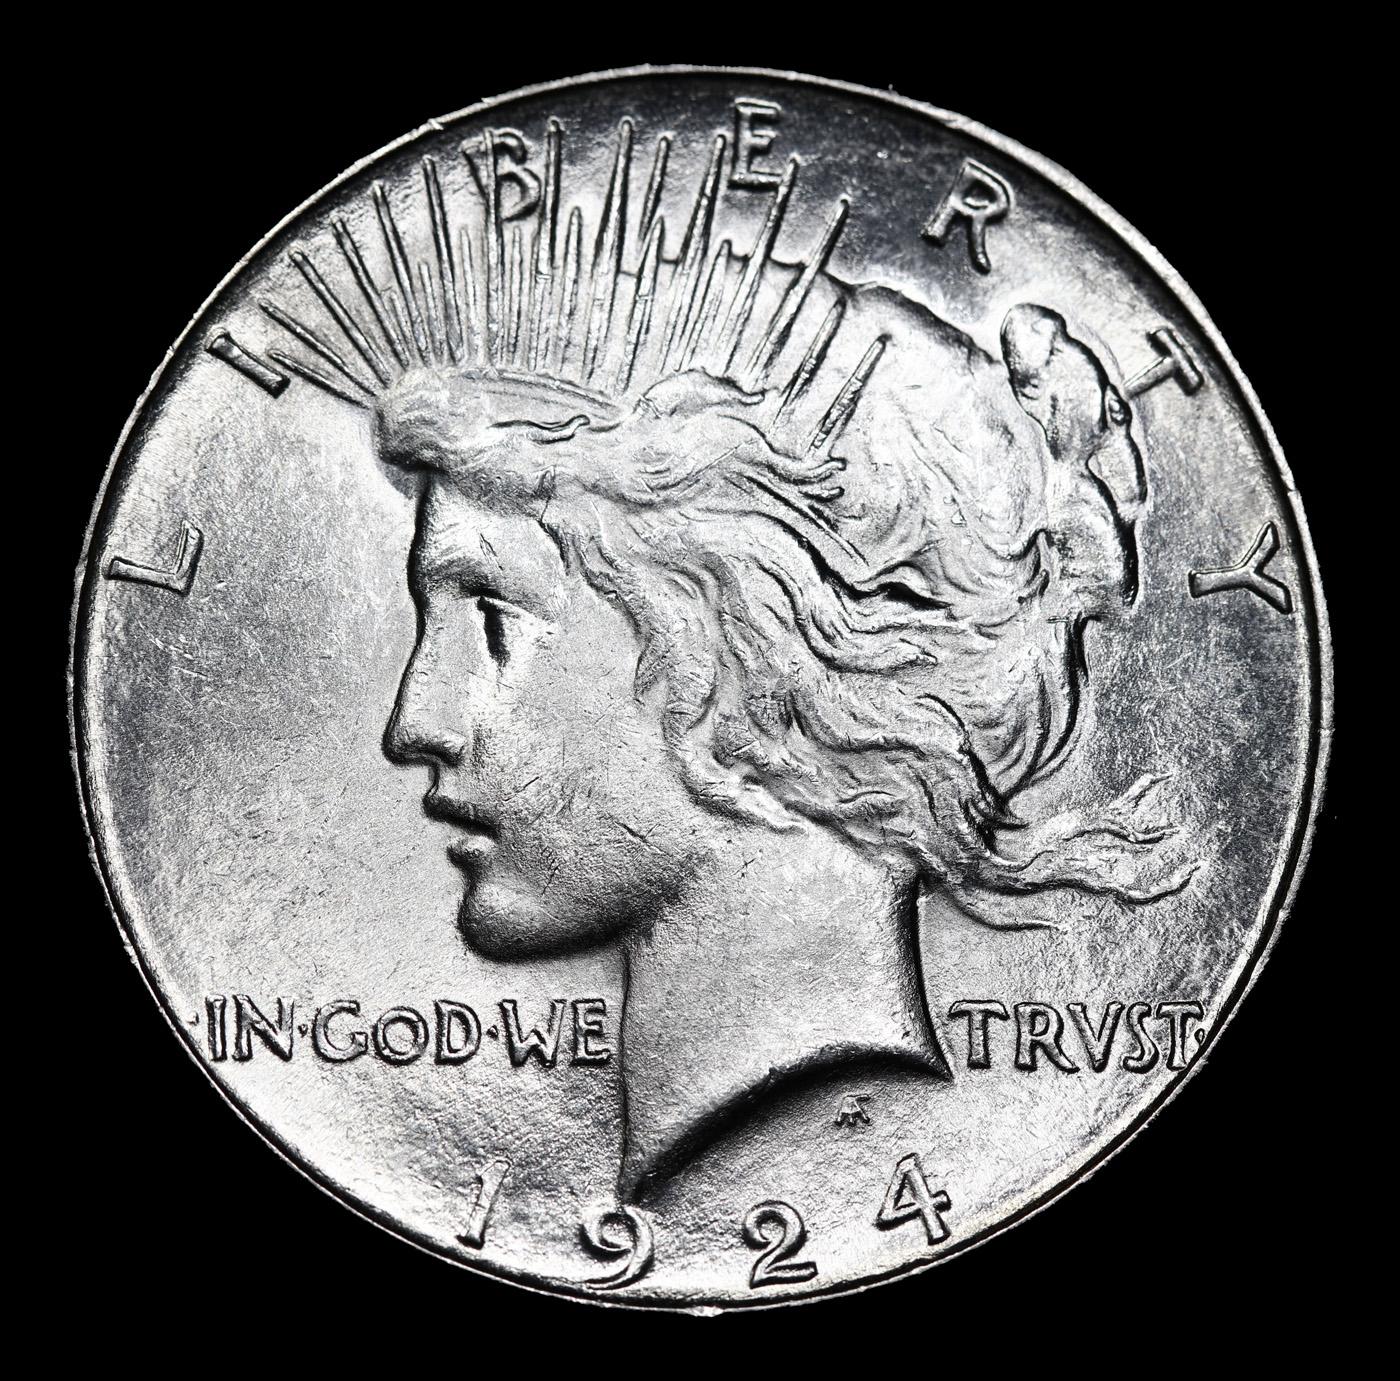 ***Auction Highlight*** 1924-s Peace Dollar $1 Graded ms65 By SEGS (fc)